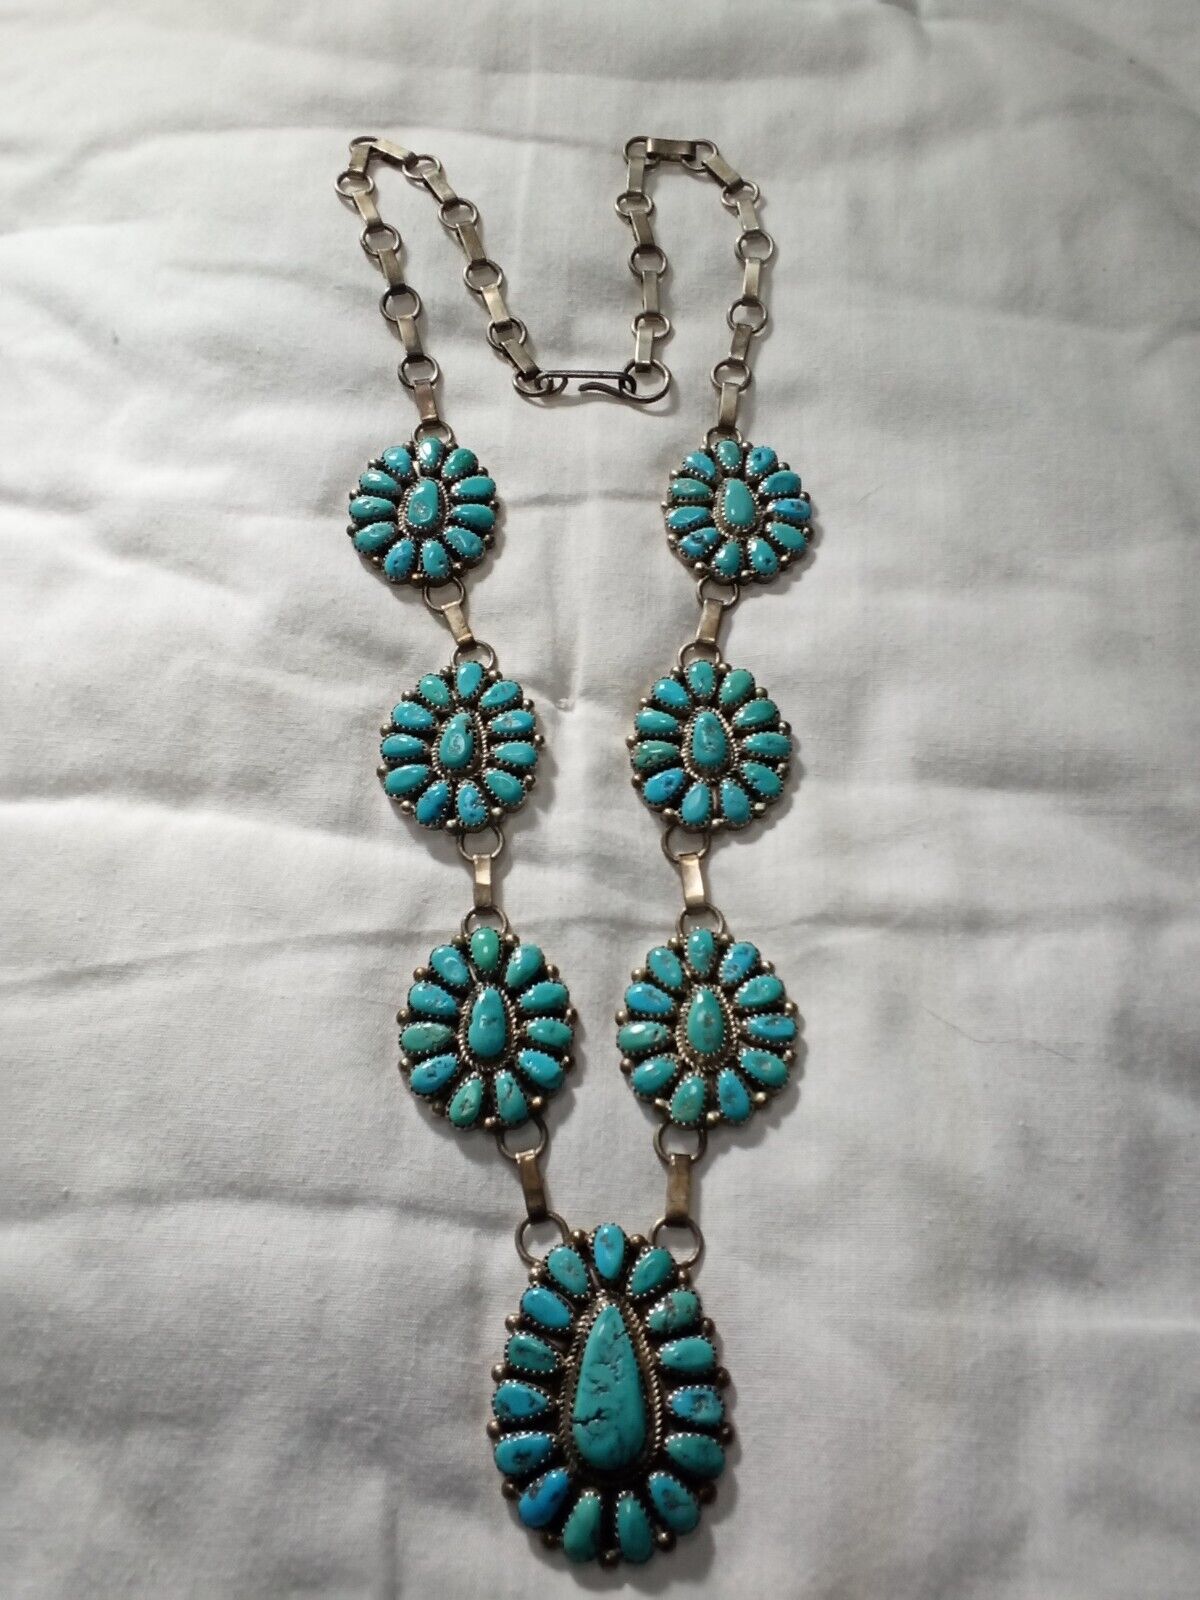 JUSTIN WILSON SR - NATIVE AMERICAN NAVAJO STERLING SILVER & TURQUOISE NECKLACE